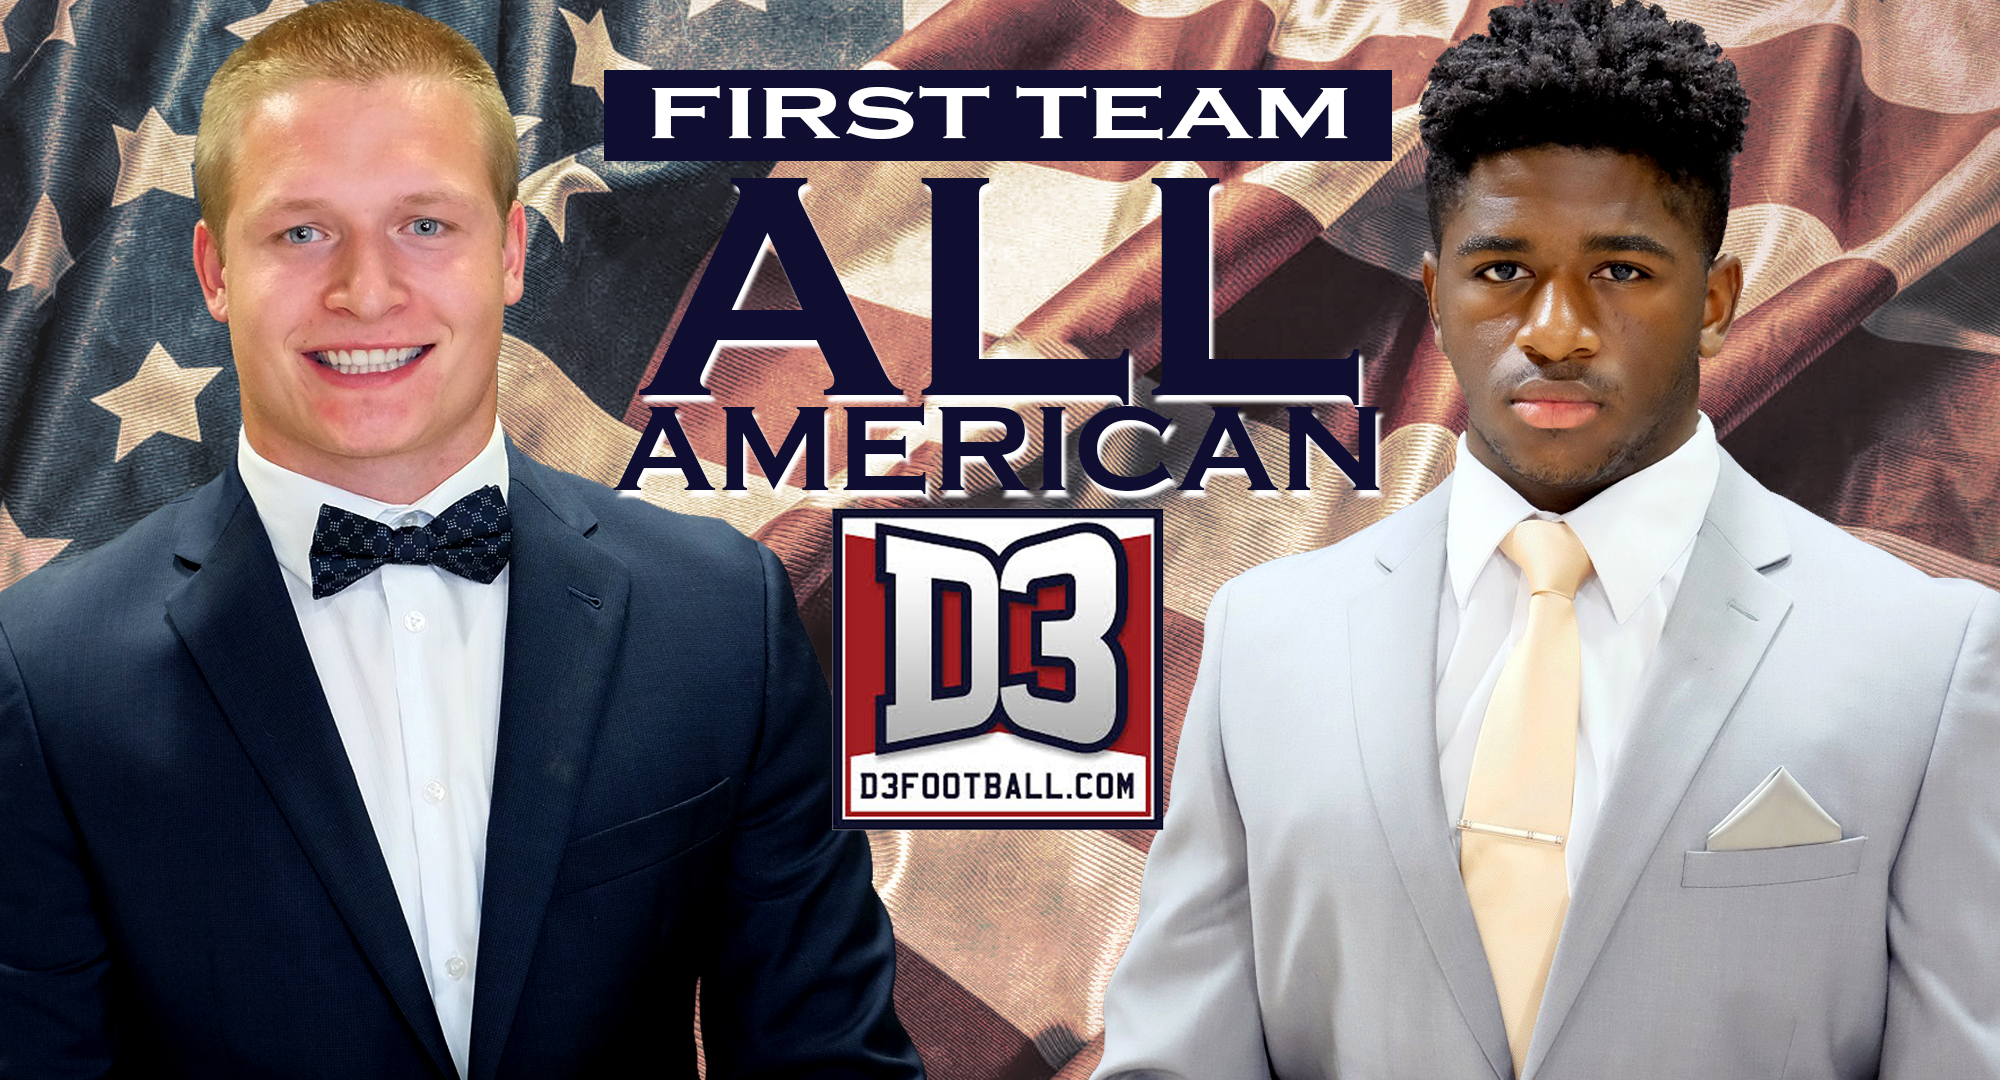 Alex Berg (L) and Willie Julkes were named to the D3football.com All-American First Team.